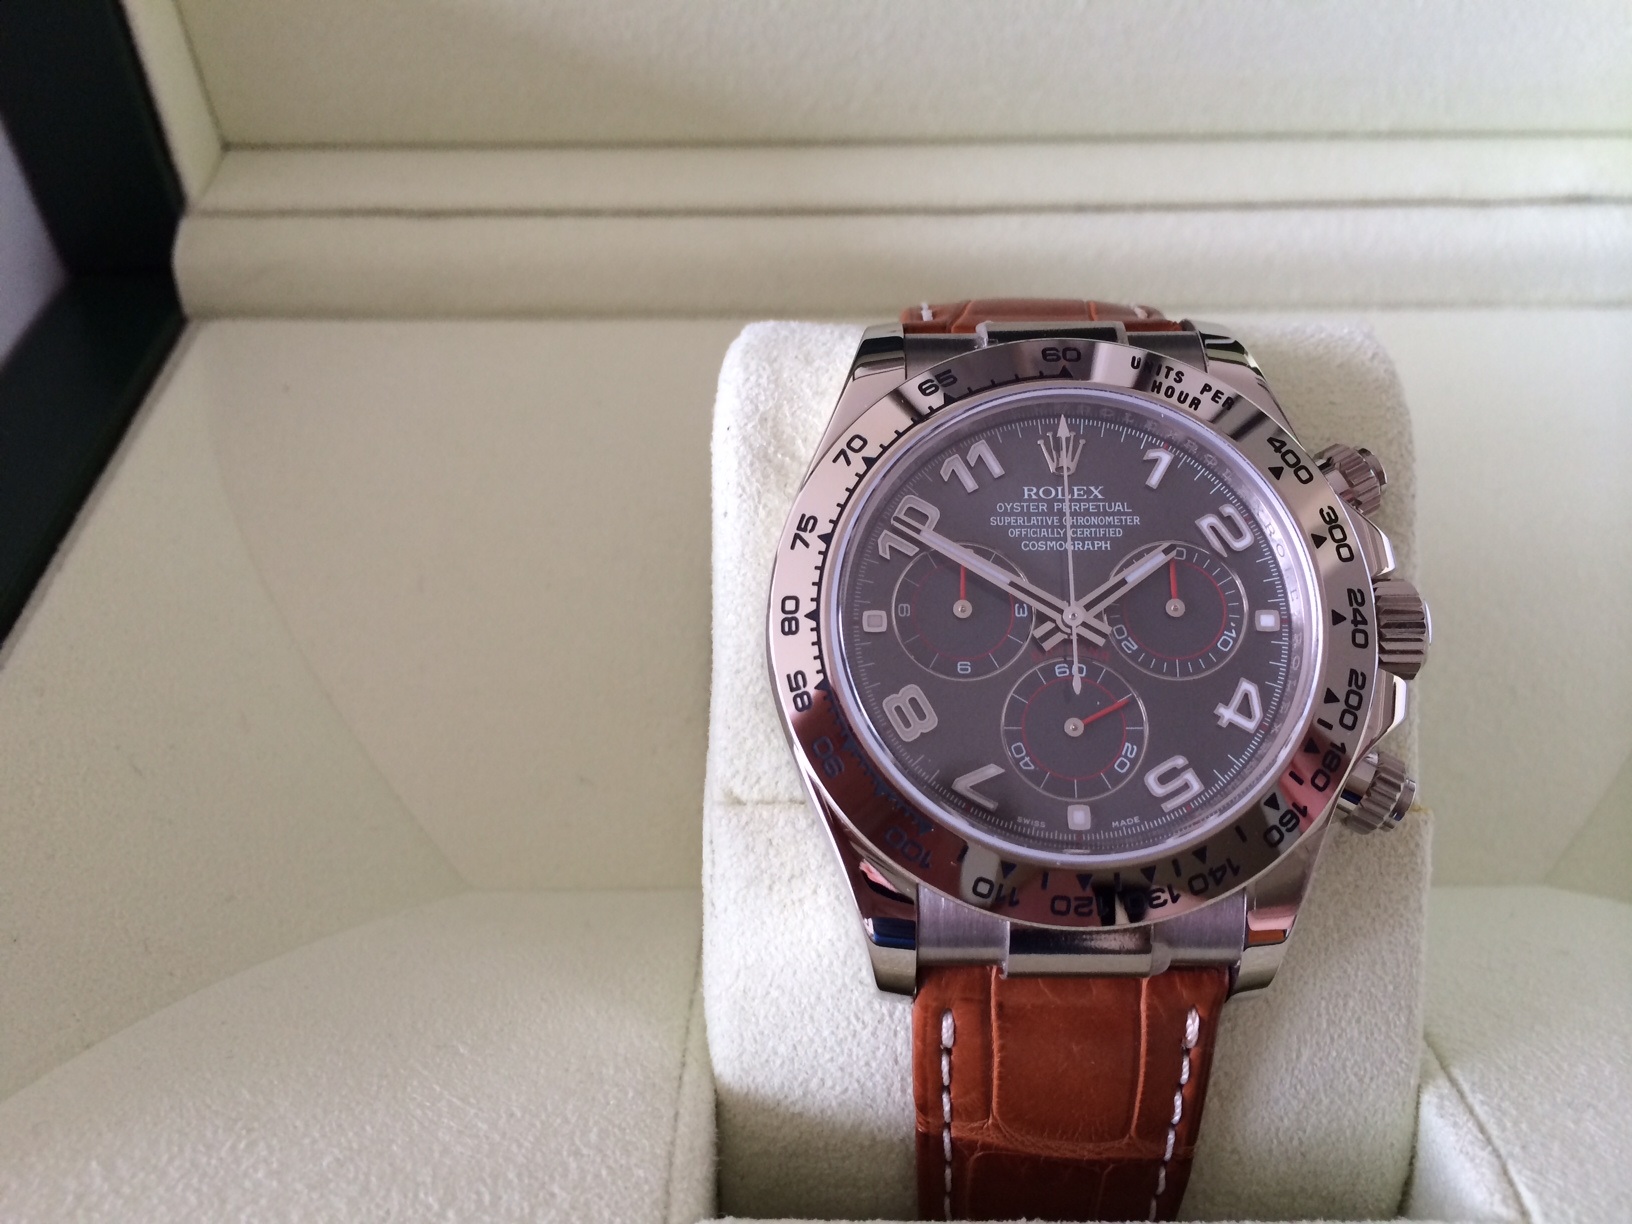 Selling watches on commission - Page 1 - Watches - PistonHeads